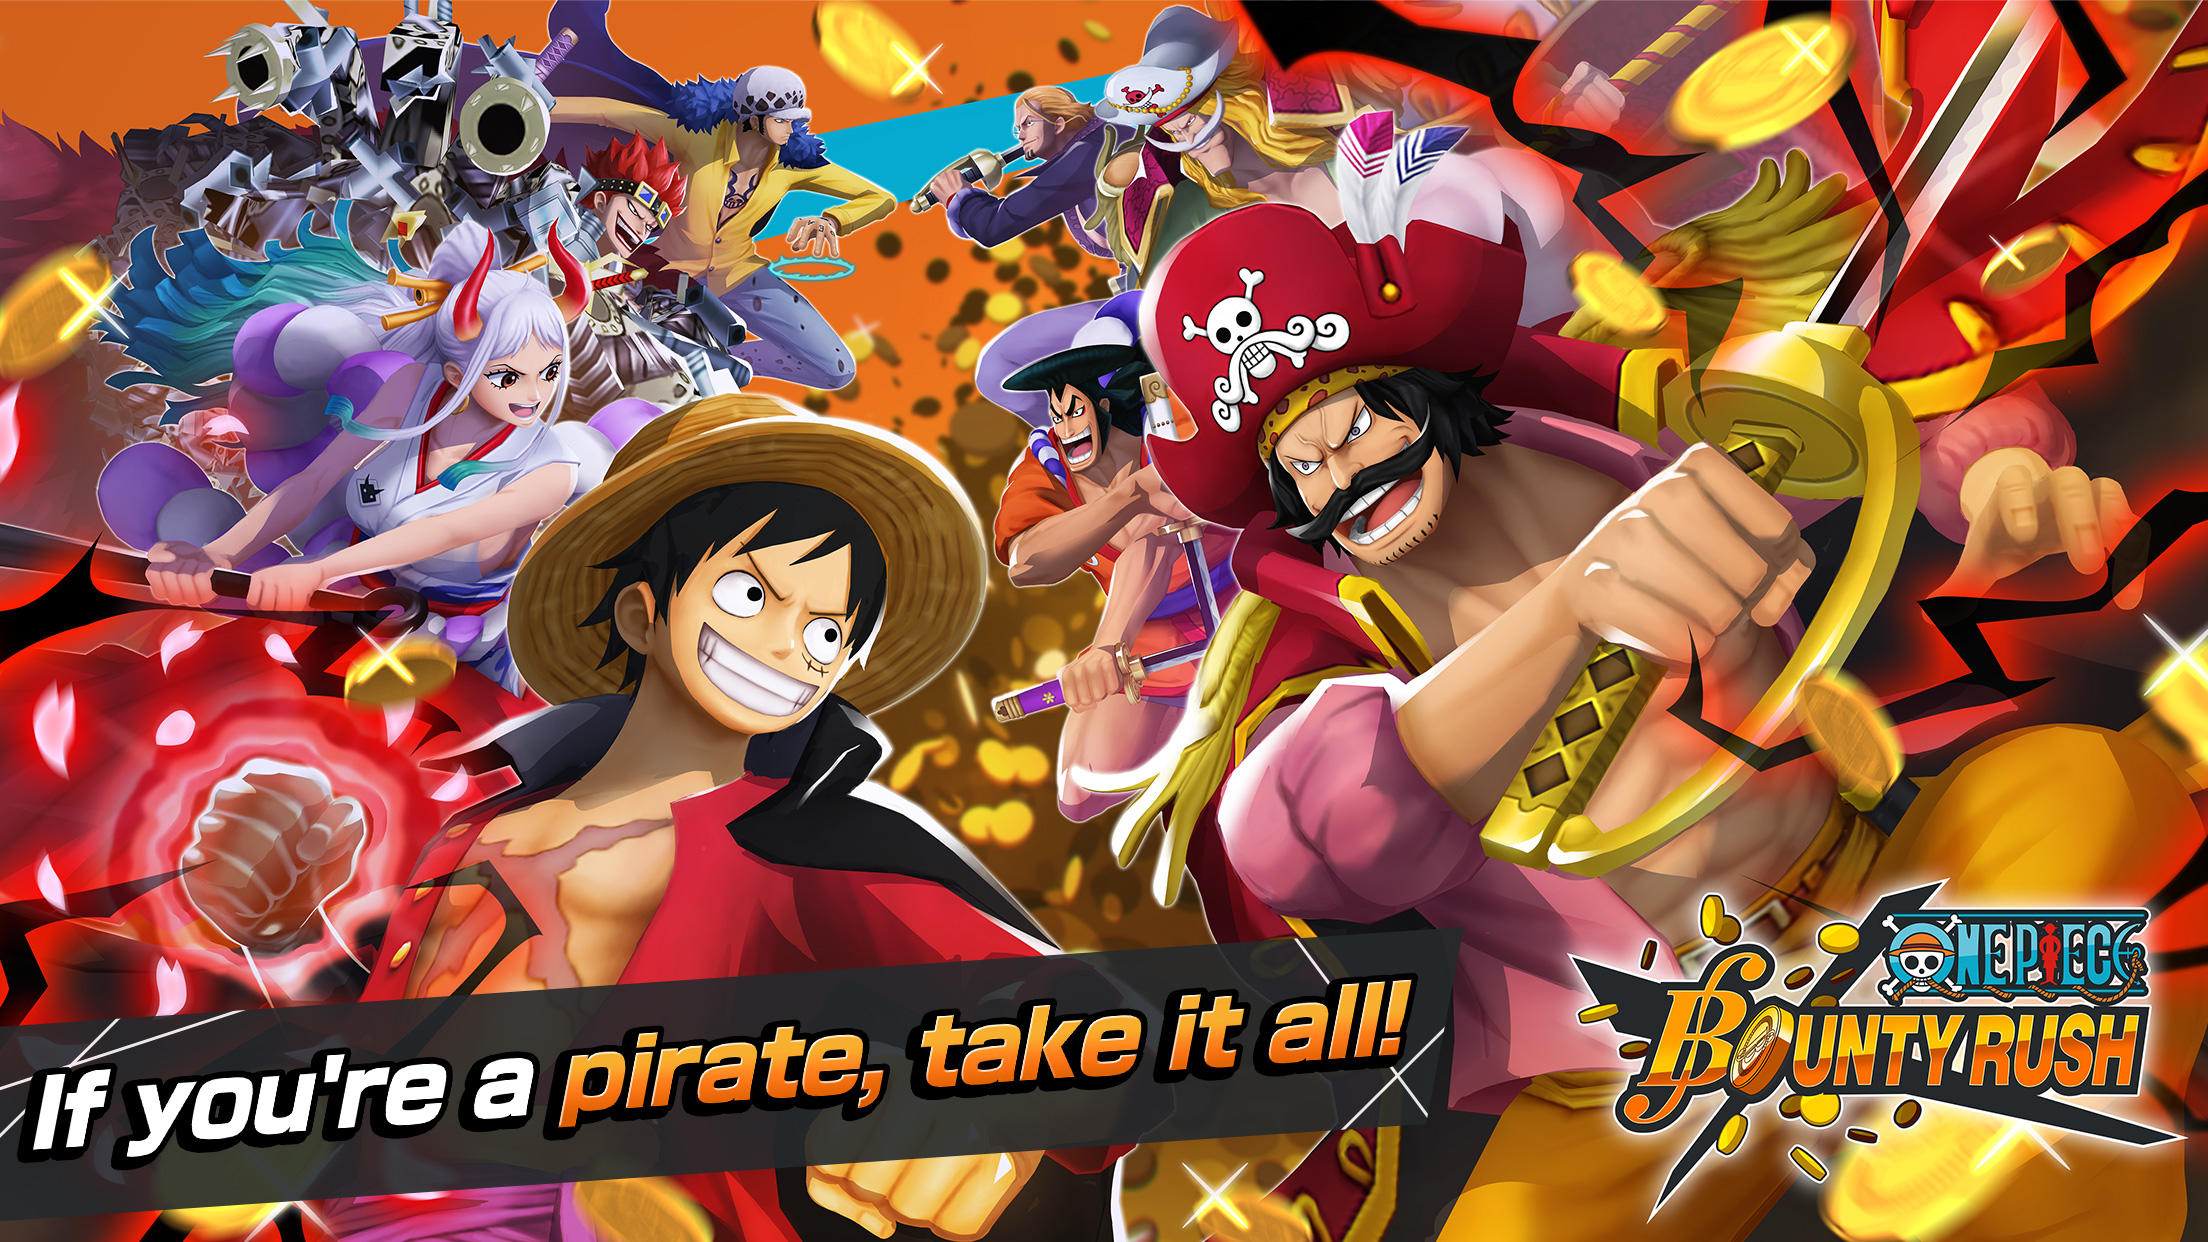 Anime Pirates Game Lets You be Part of Popular Manga 'One Piece' World